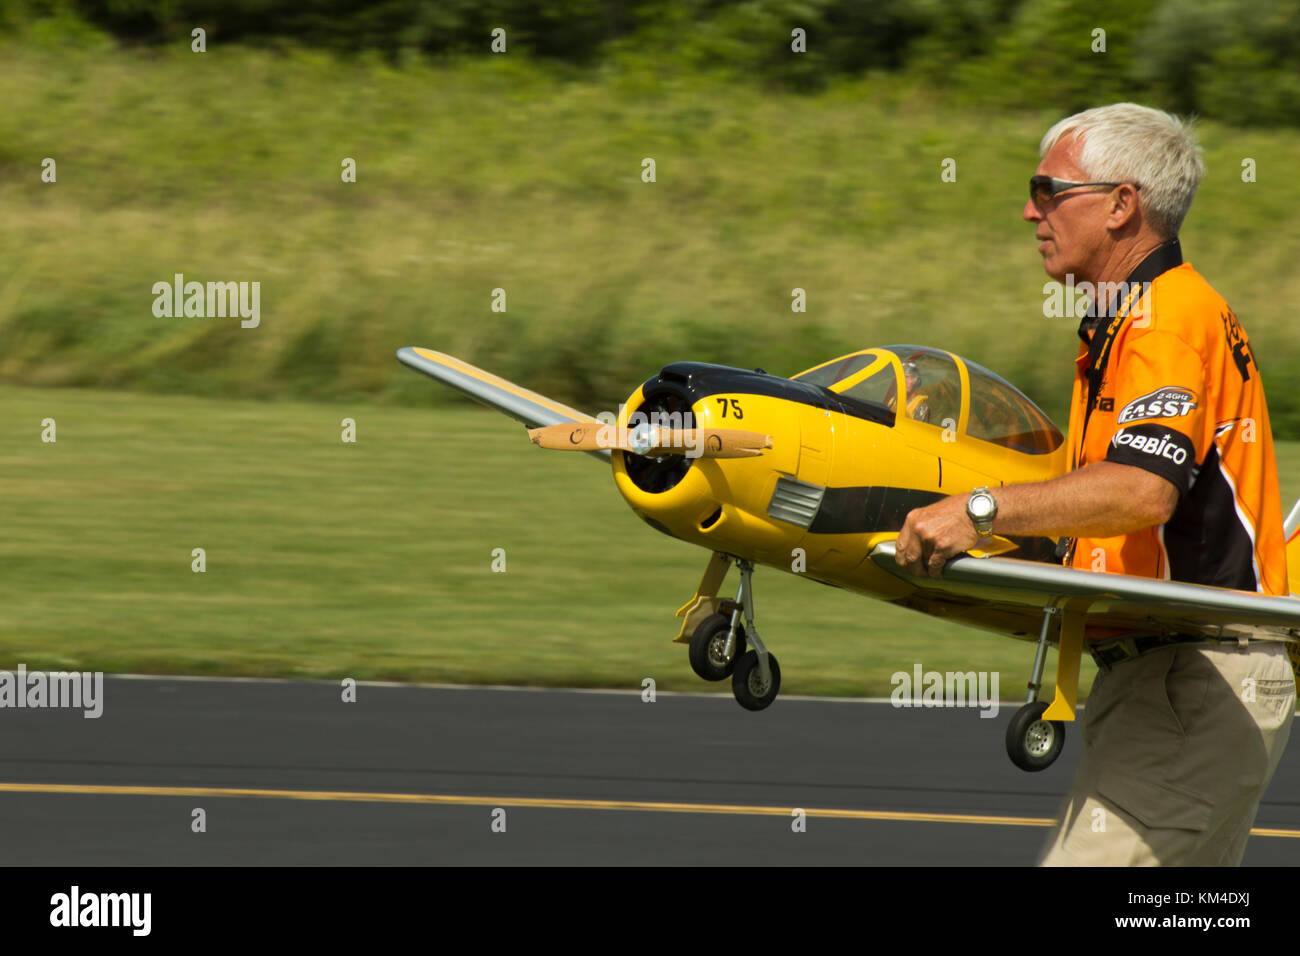 Pilot caring a prop place on runway. Stock Photo